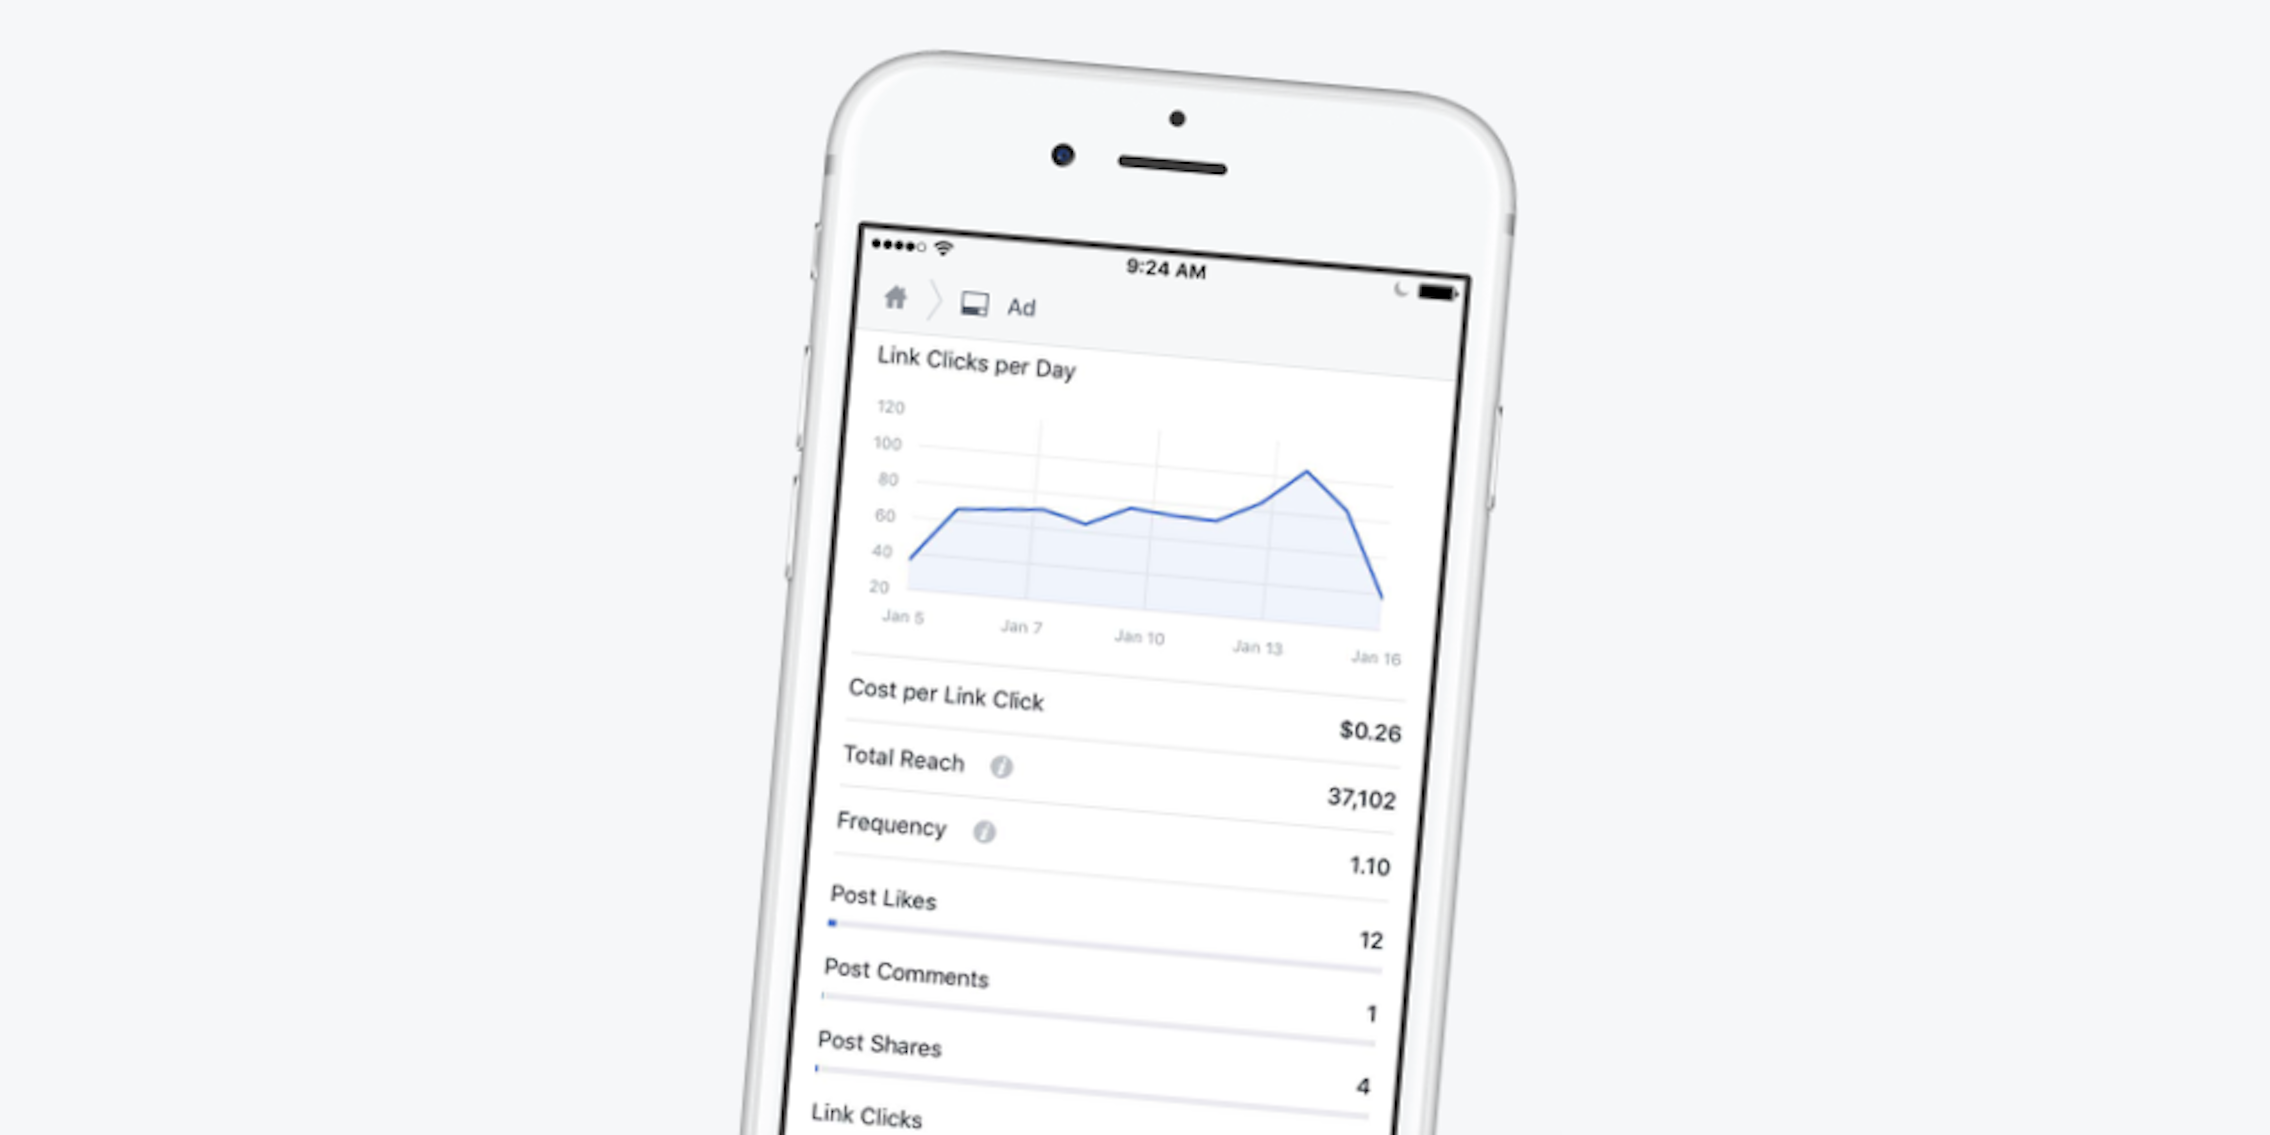 Facebook targeted ads, metrics on ads on iPhone screen